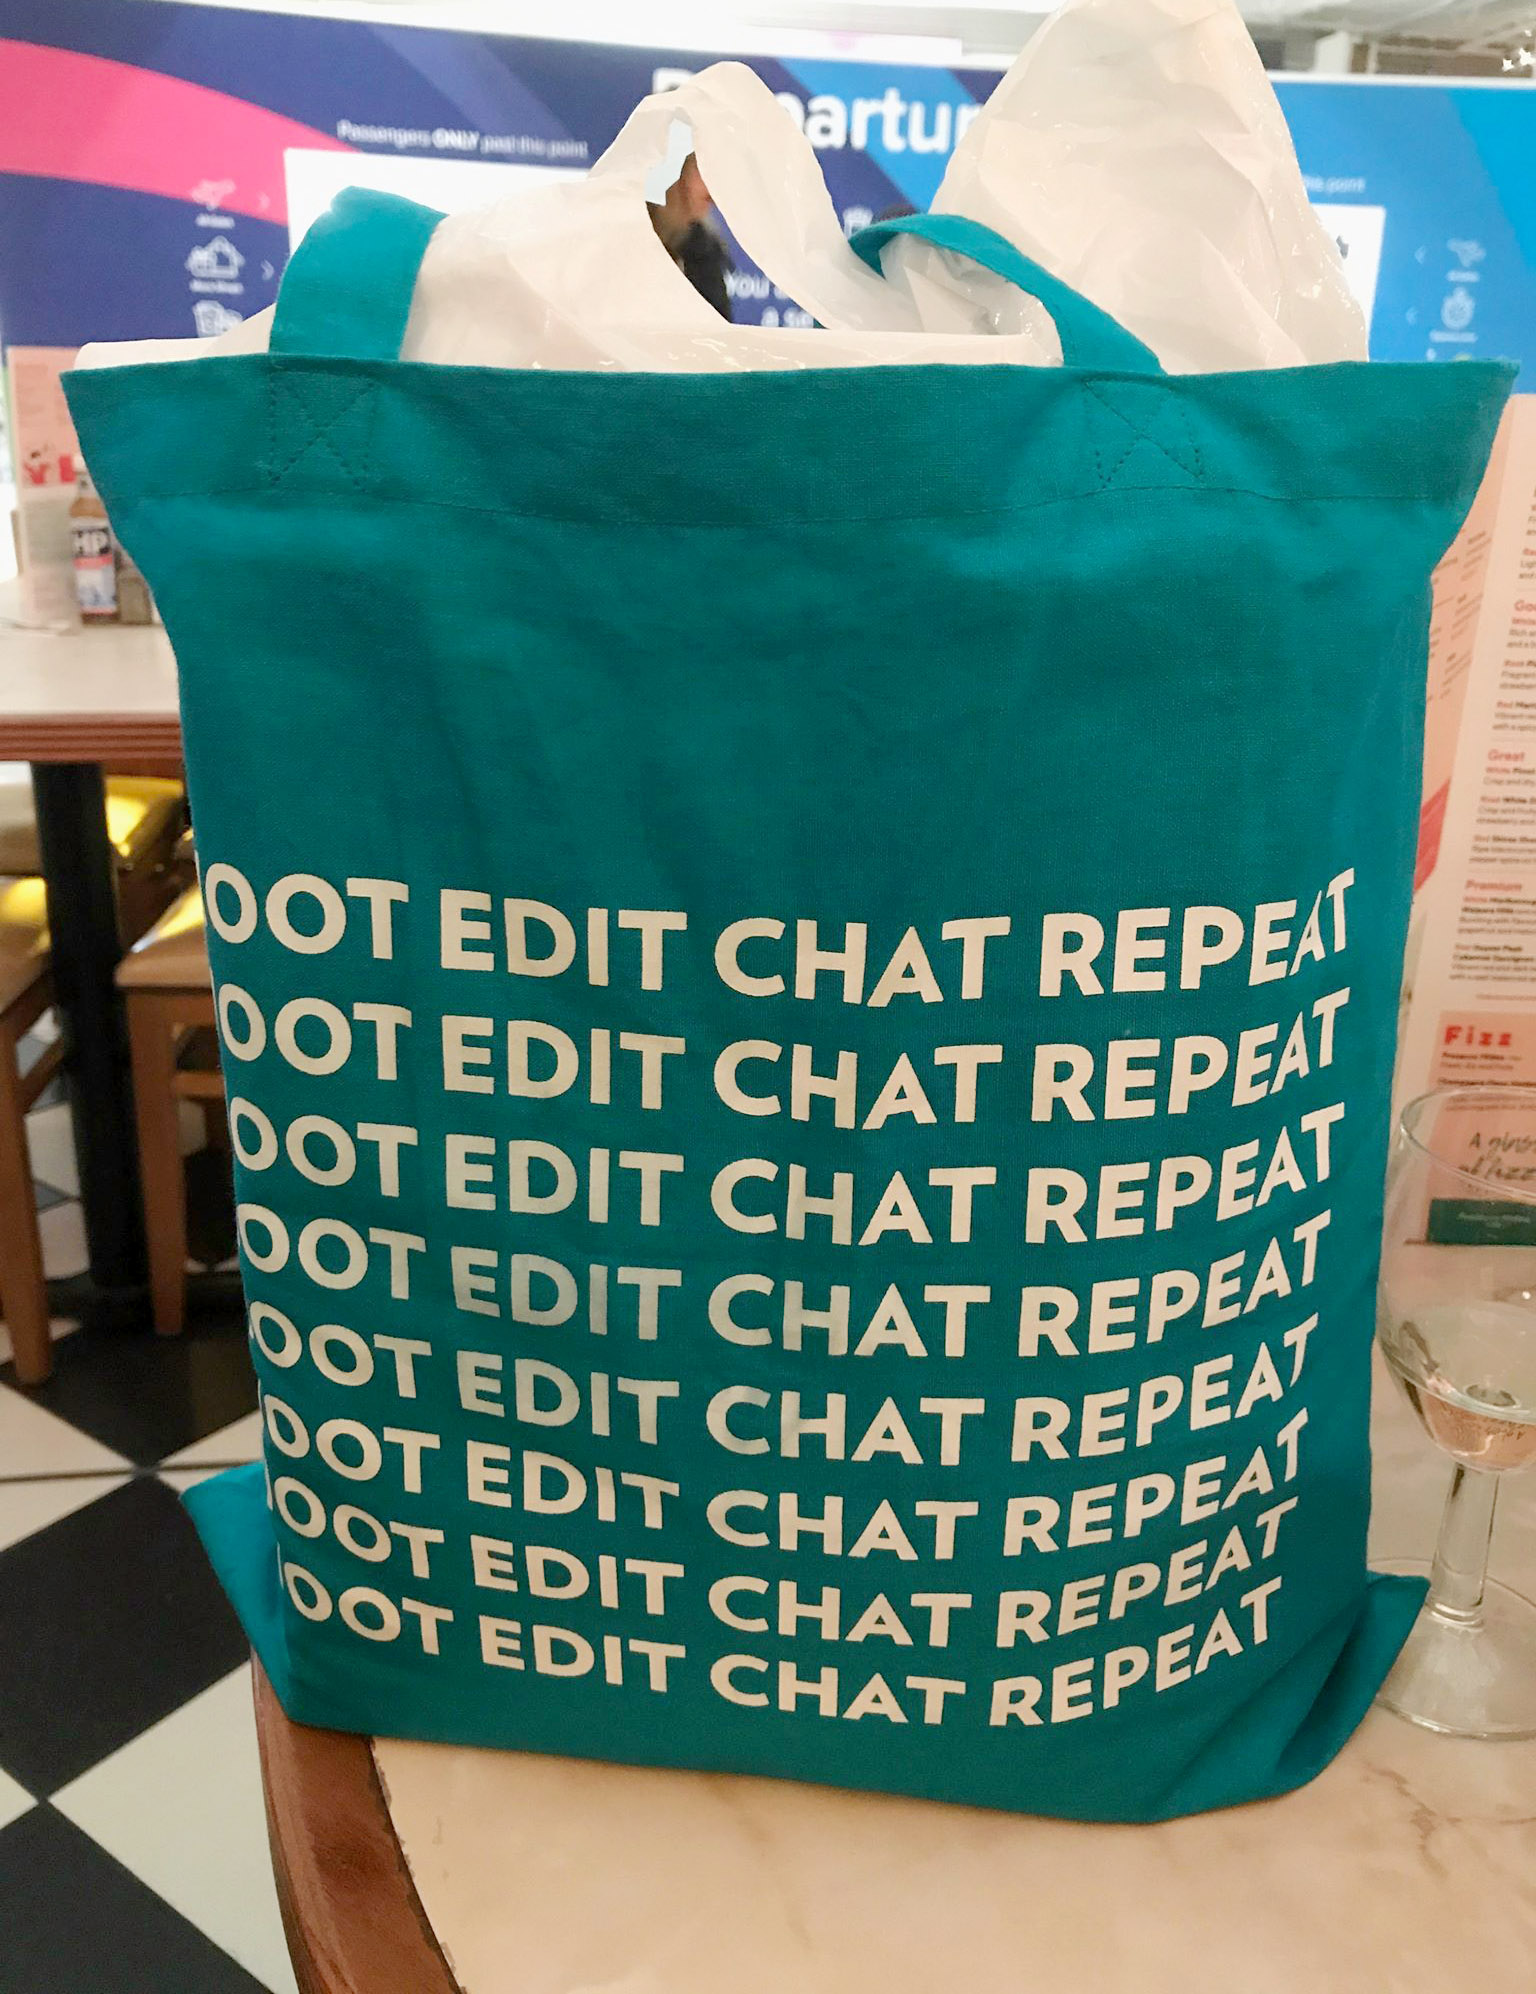 Good thing we brought our favoruite shopping bag!